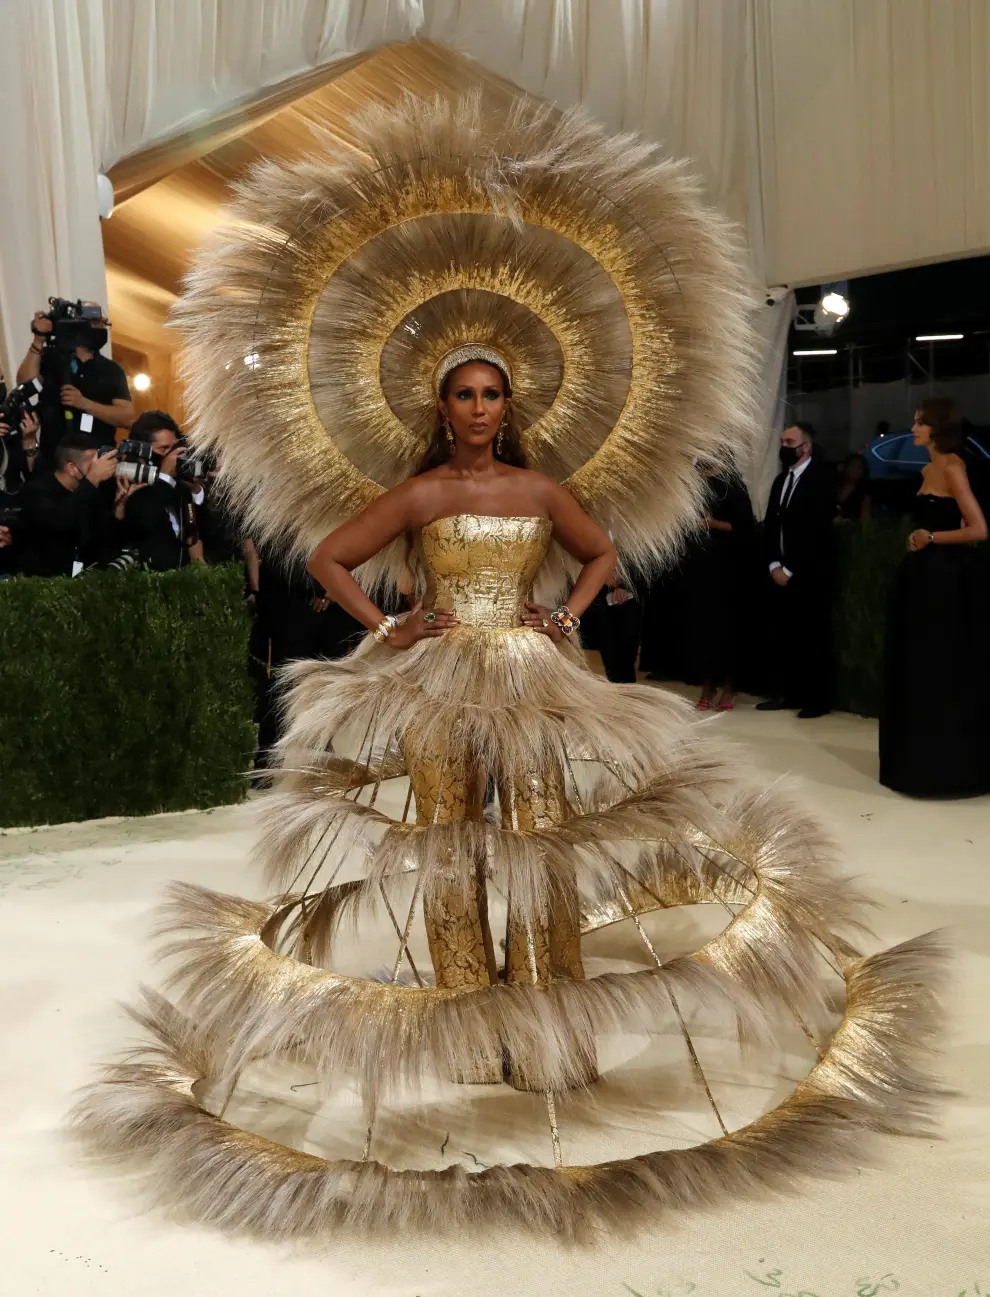 New York (United States), 13/09/2021.- Michaela Coel poses on the red carpet for the 2021 Met Gala, the annual benefit for the Metropolitan Museum of Art's Costume Institute, in New York, New York, USA, 13 September 2021. The event coincides with the Met Costume Institute's first two-part exhibition, 'In America: A Lexicon of Fashion' which opens 18 September 2021, to be followed by 'In America: An Anthology of Fashion' which opens 05 May 2022 and both conclude 05 September 2022. (Moda, Abierto, Estados Unidos, Nueva York) EFE/EPA/JUSTIN LANE
 USA NEW YORK MET GALA